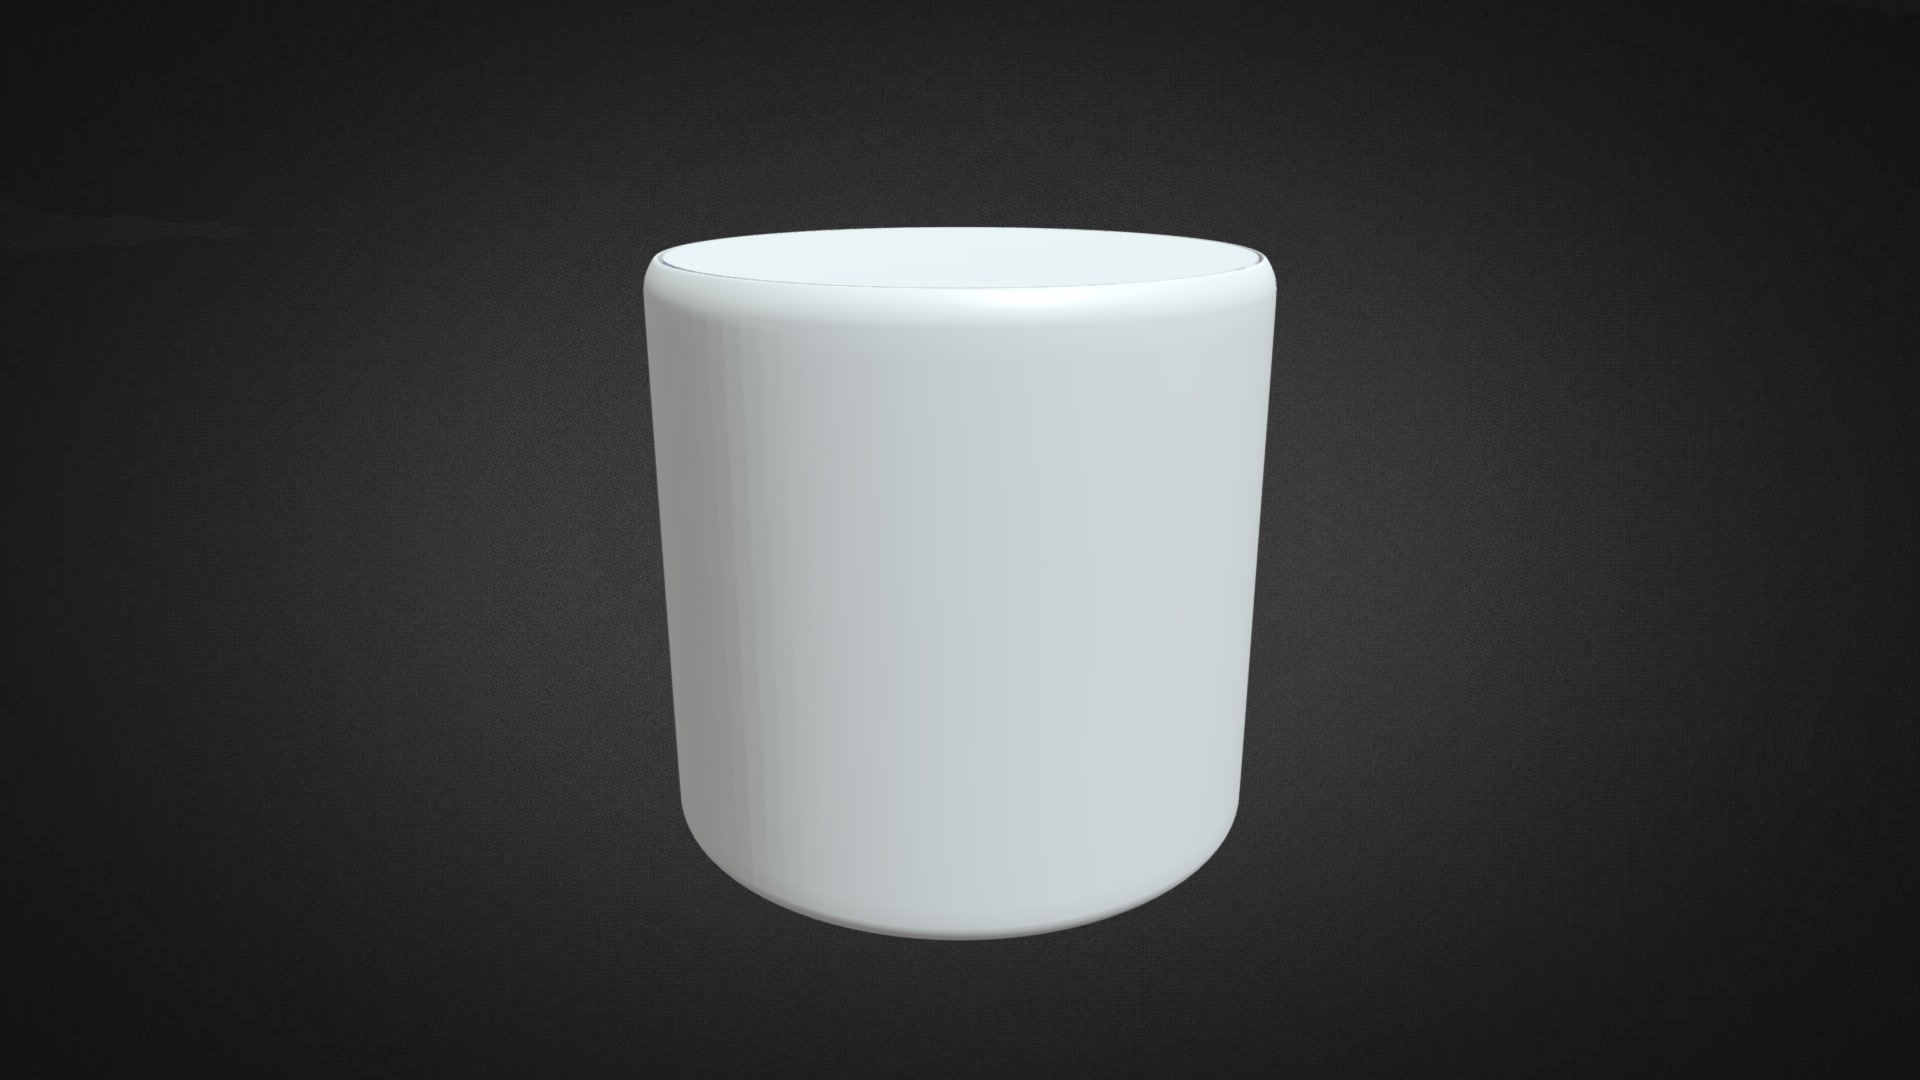 3D model Cylinder Table Hire - This is a 3D model of the Cylinder Table Hire. The 3D model is about a white candle on a black background.